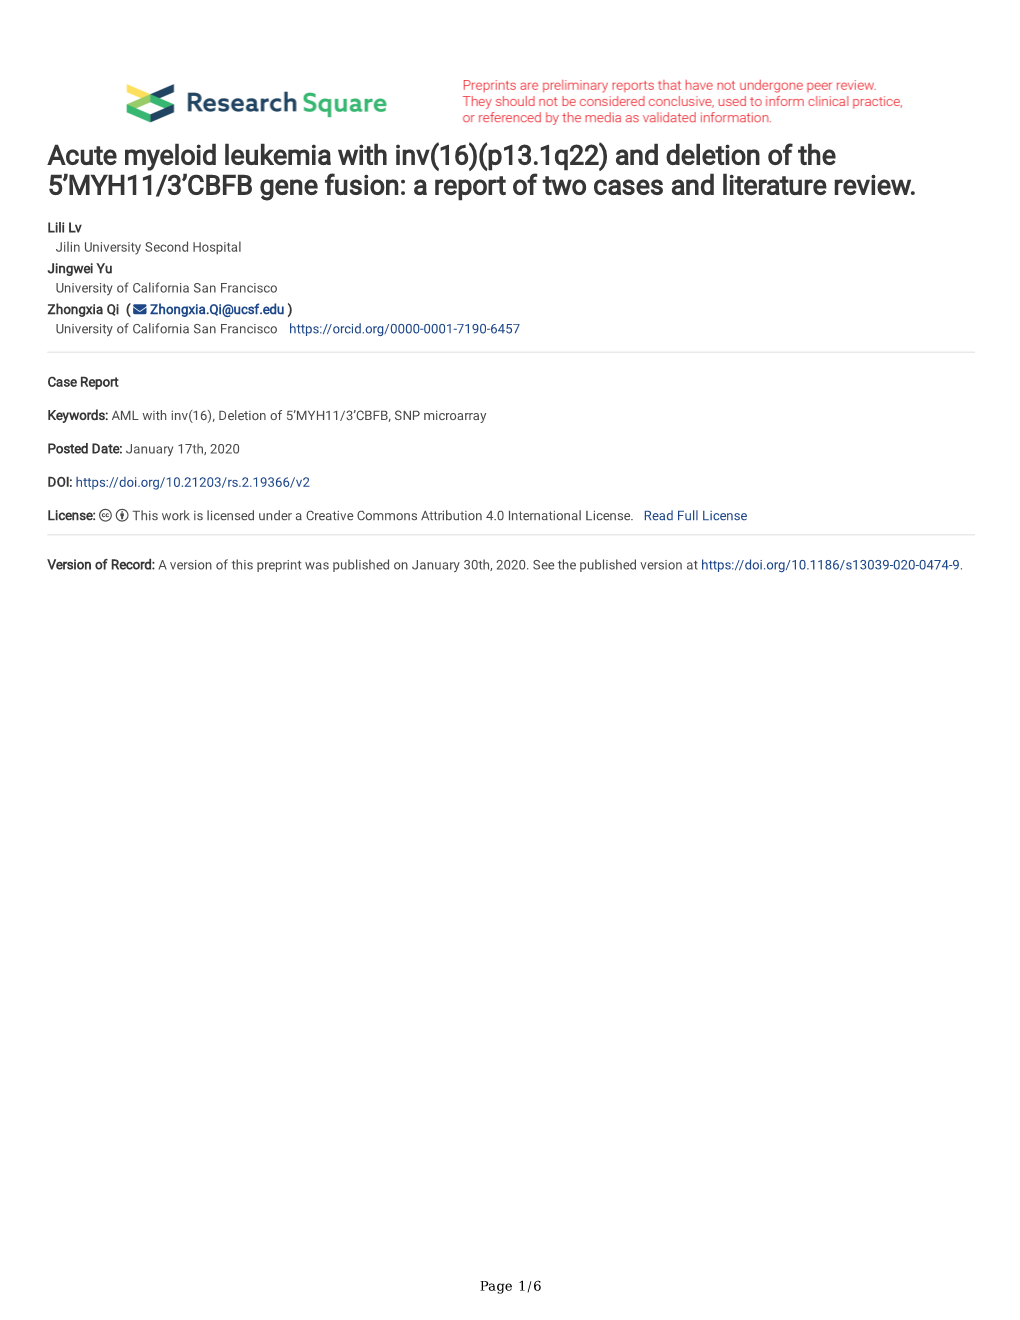 Acute Myeloid Leukemia with Inv(16)(P13.1Q22) and Deletion of the 5'MYH11/3'CBFB Gene Fusion: a Report of Two Cases and Lite